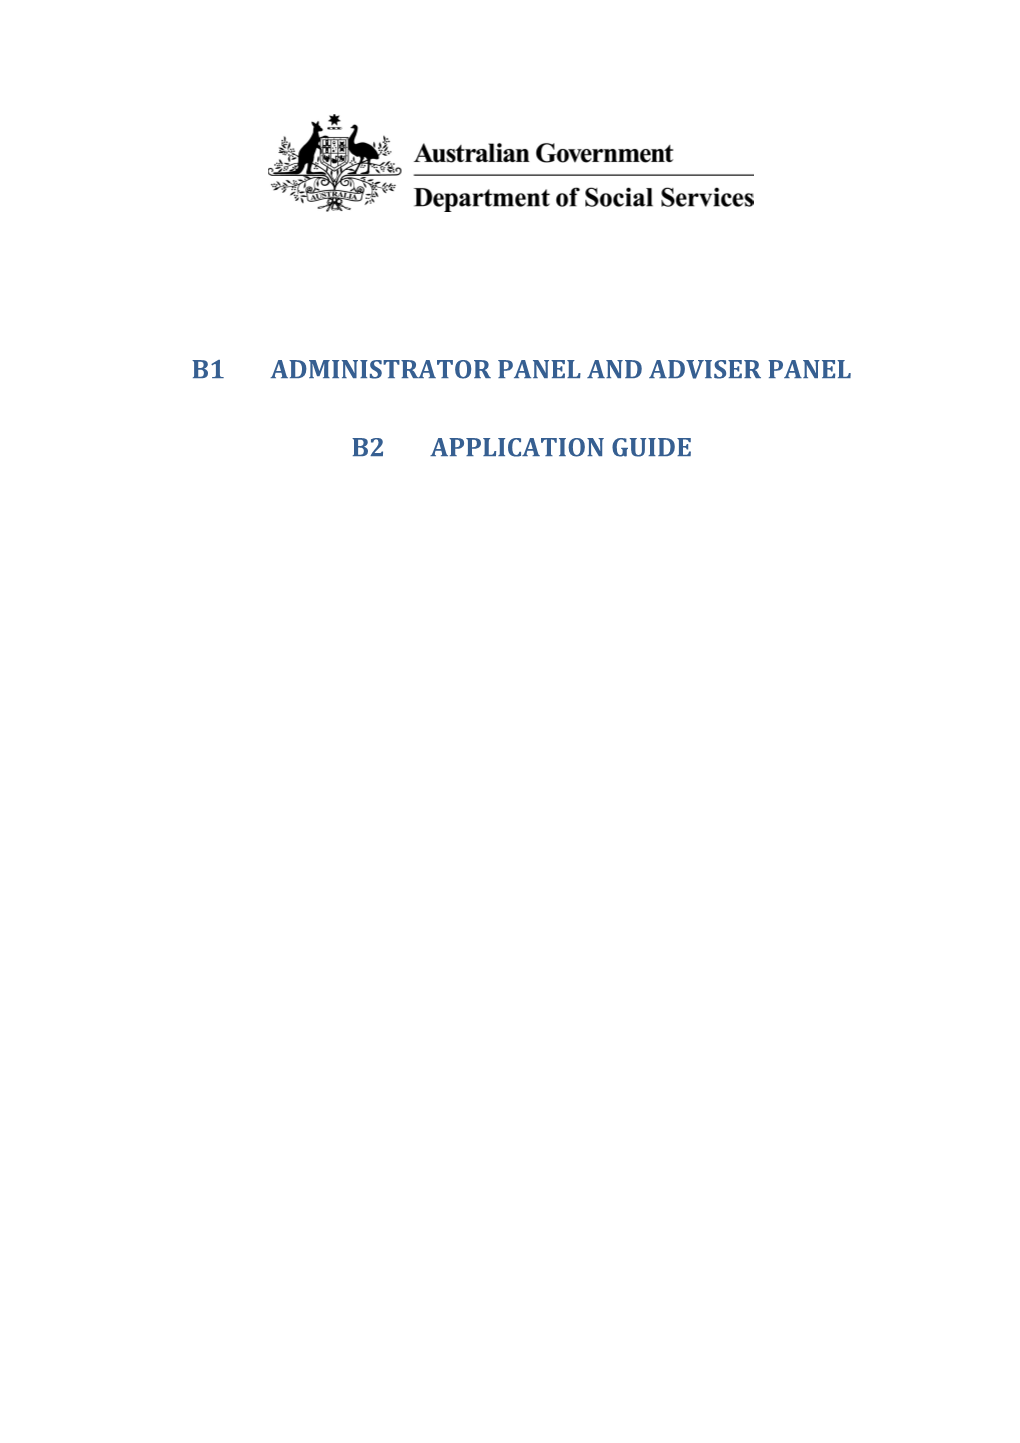 Administrator Panel and Adviser Panel Application Guide